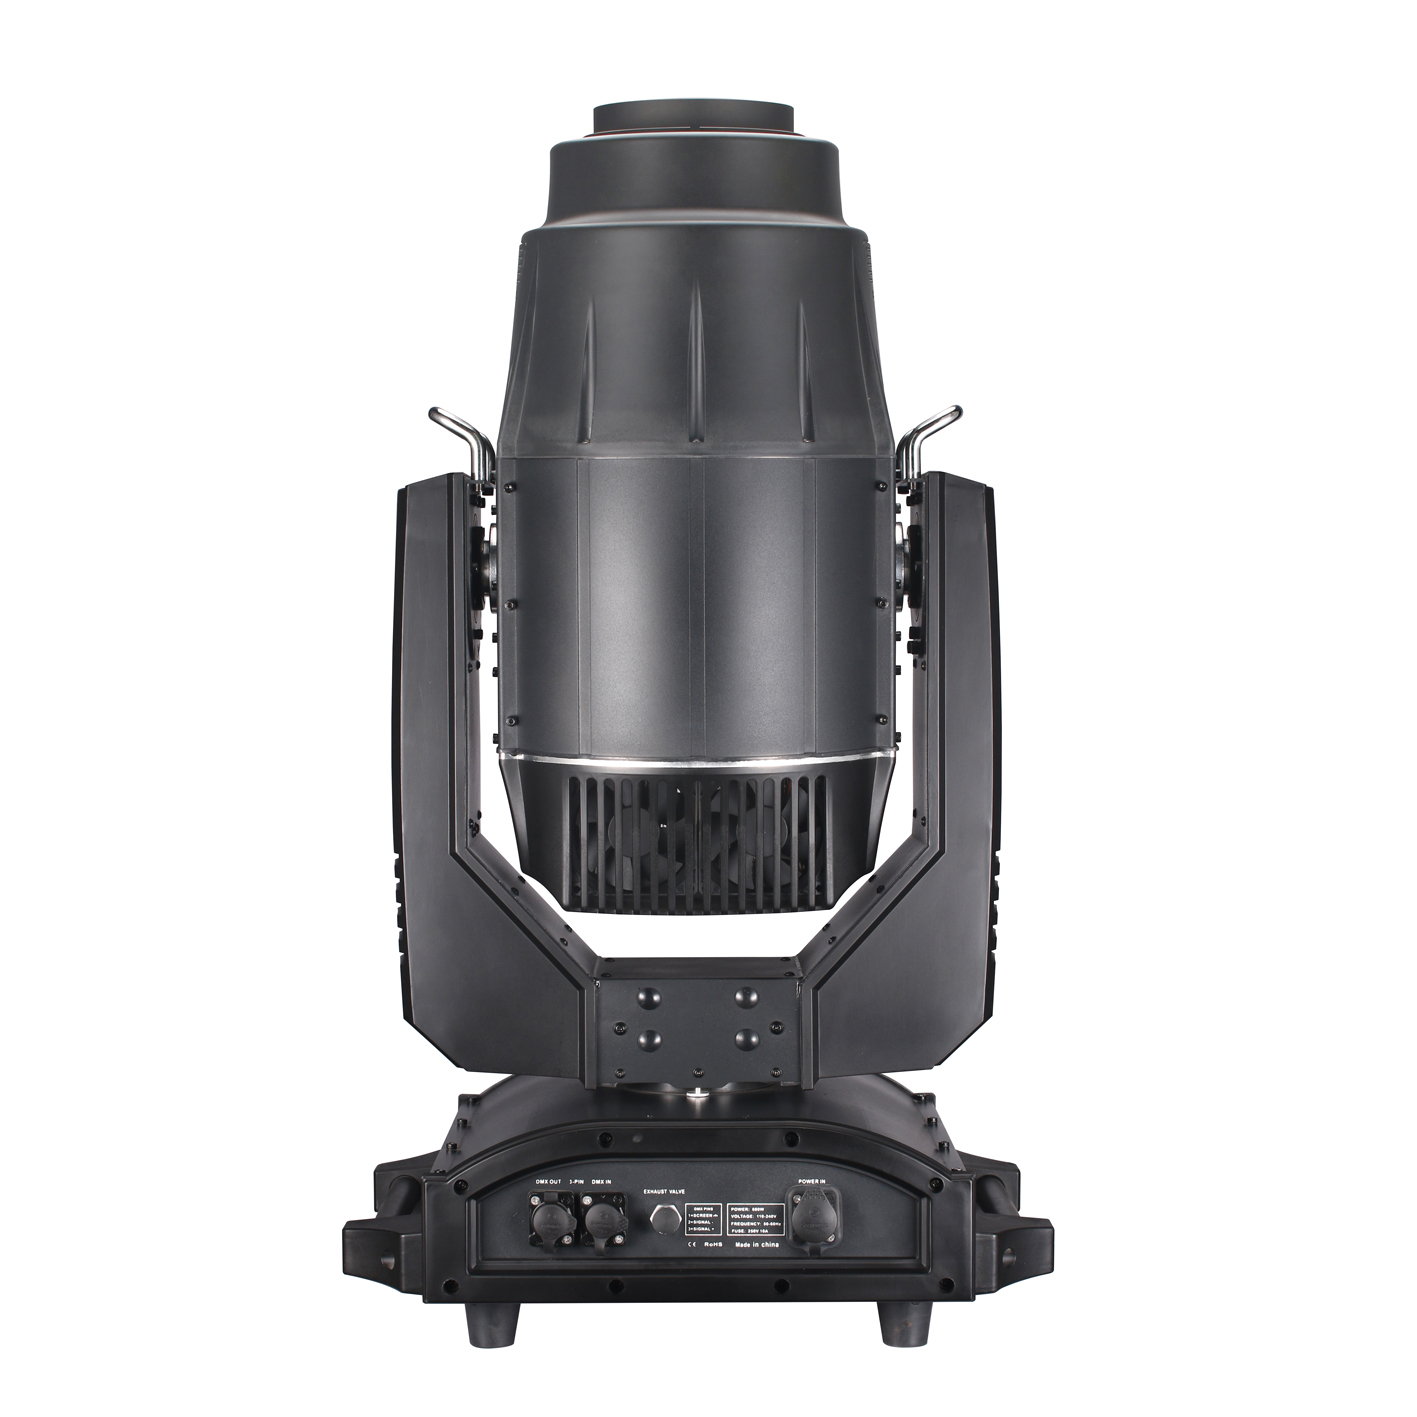 Waterproof Framing 700w CMY CTO Beam Spot Wash 3in1 Led Moving Head Light FD-LW700BSW